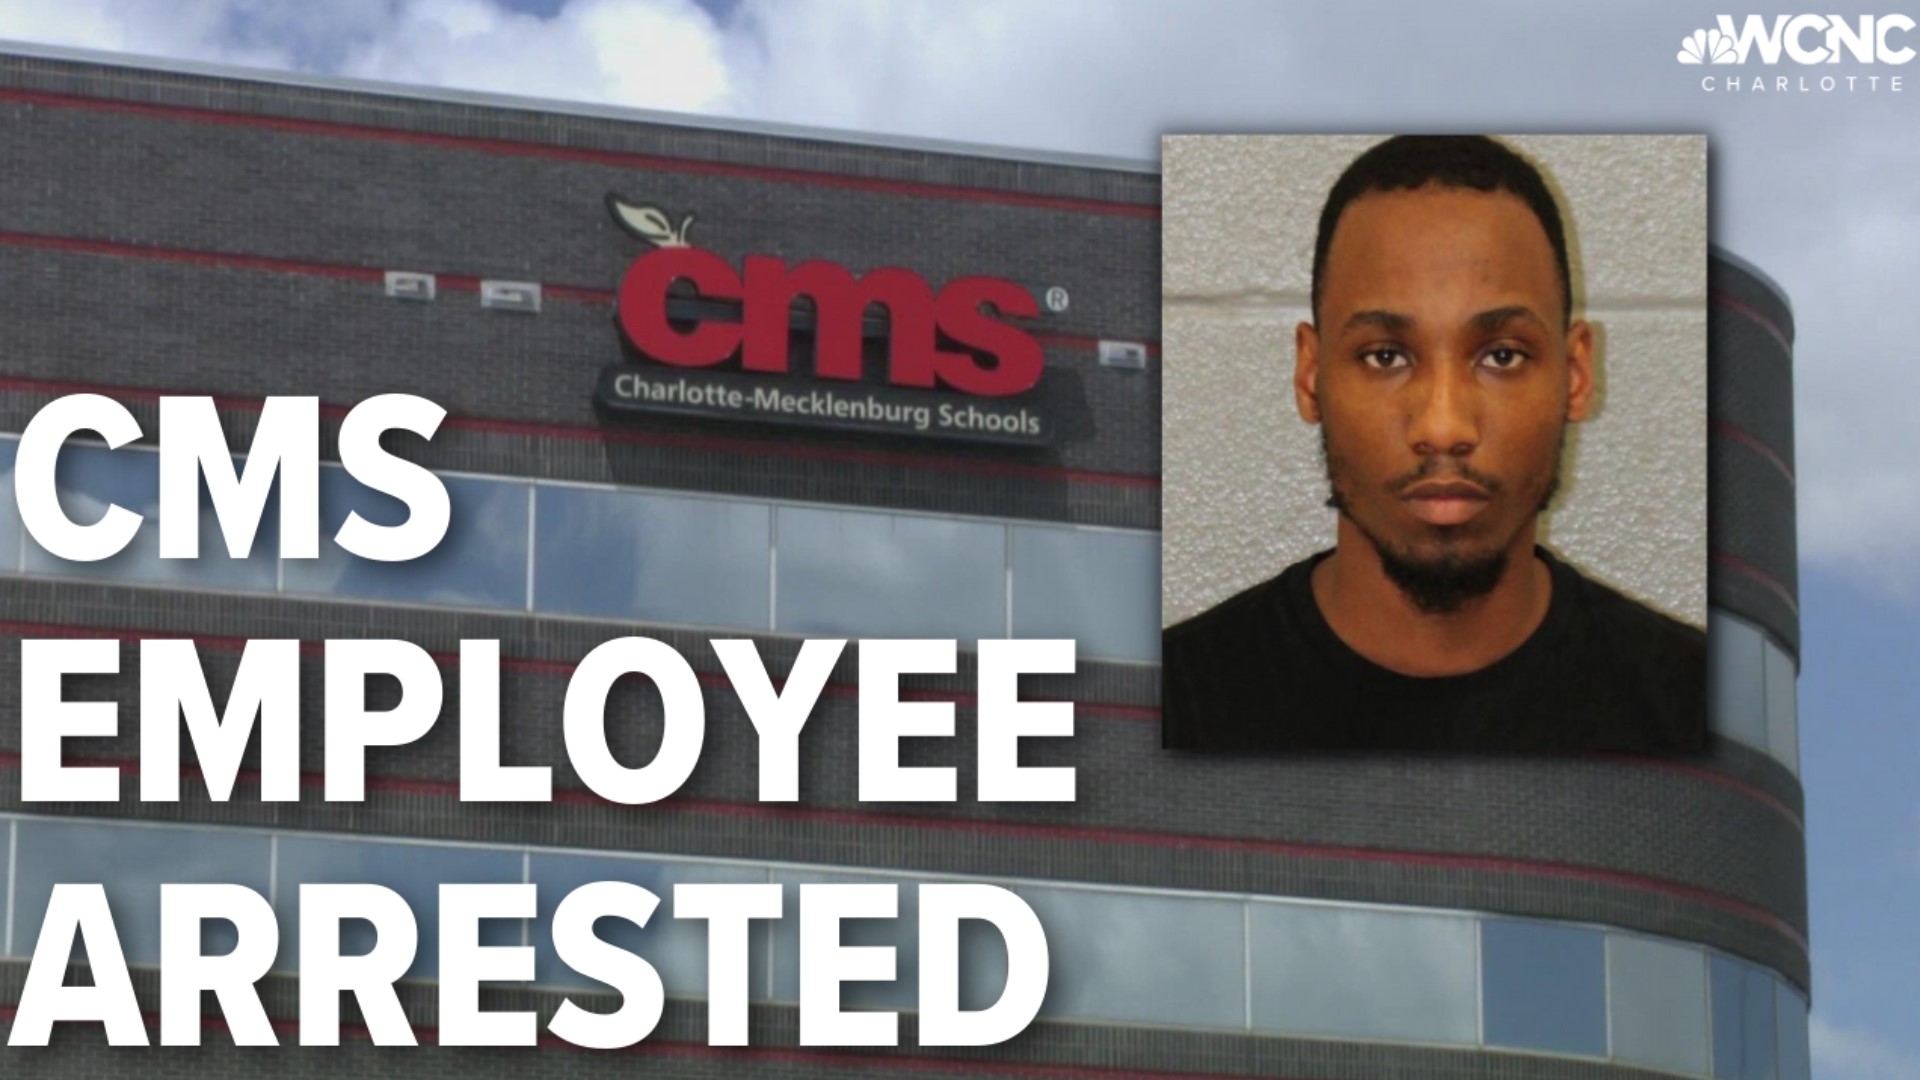 The employee has been suspended with pay during the investigation, according to CMS.